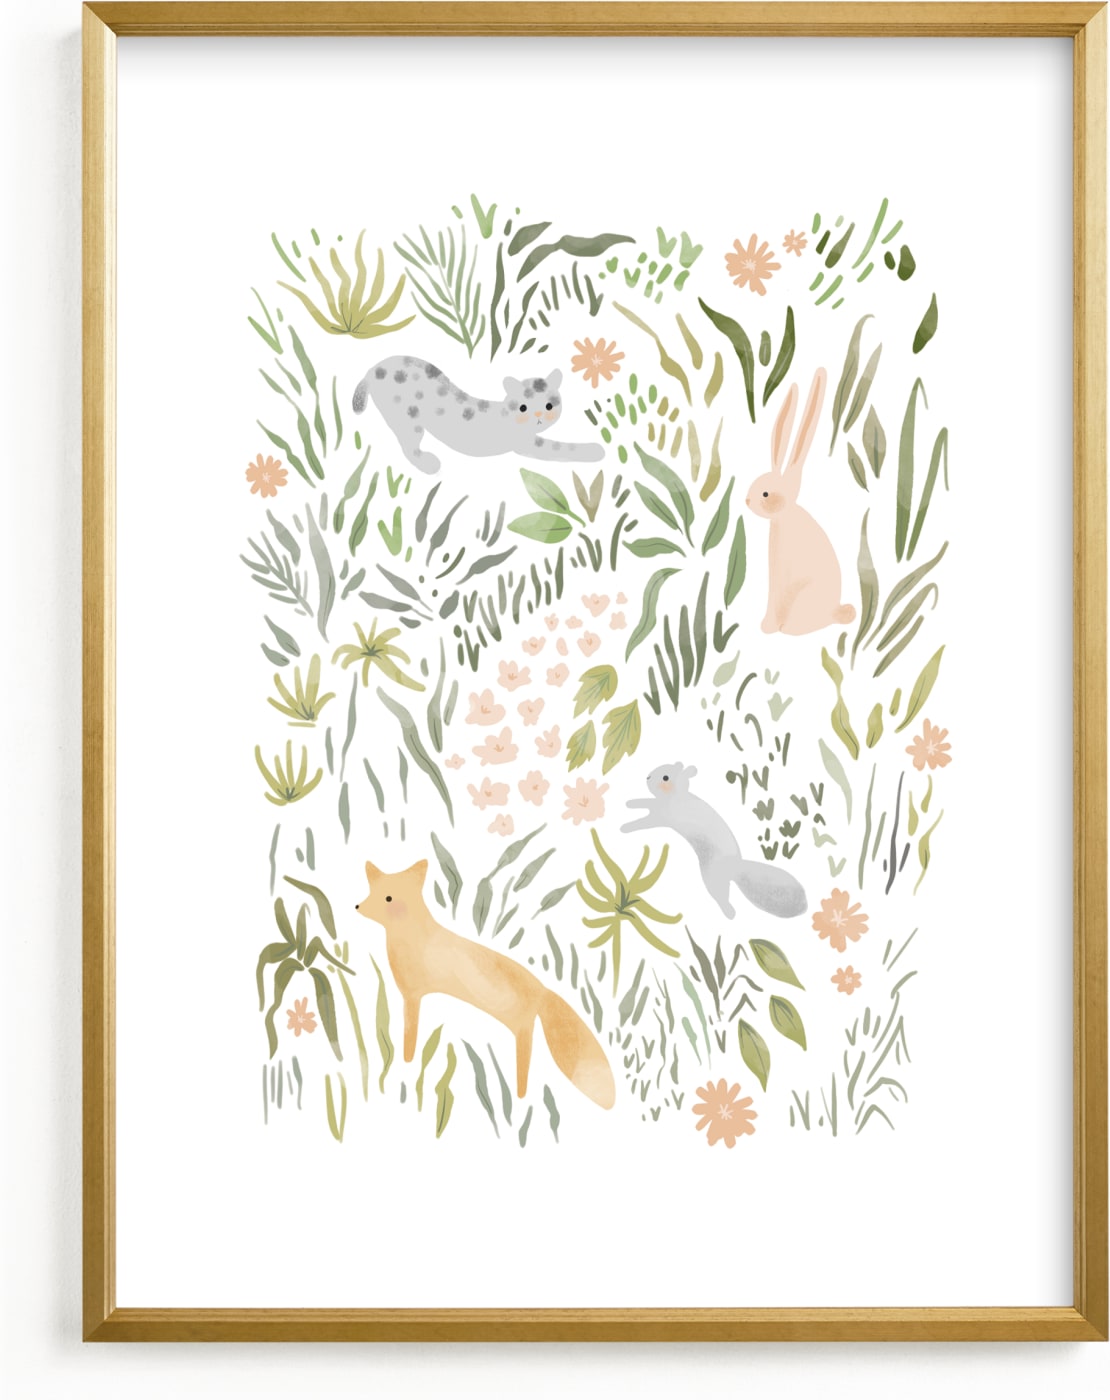 This is a colorful, pink, green art by Hannah Williams called Flora and Fauna.